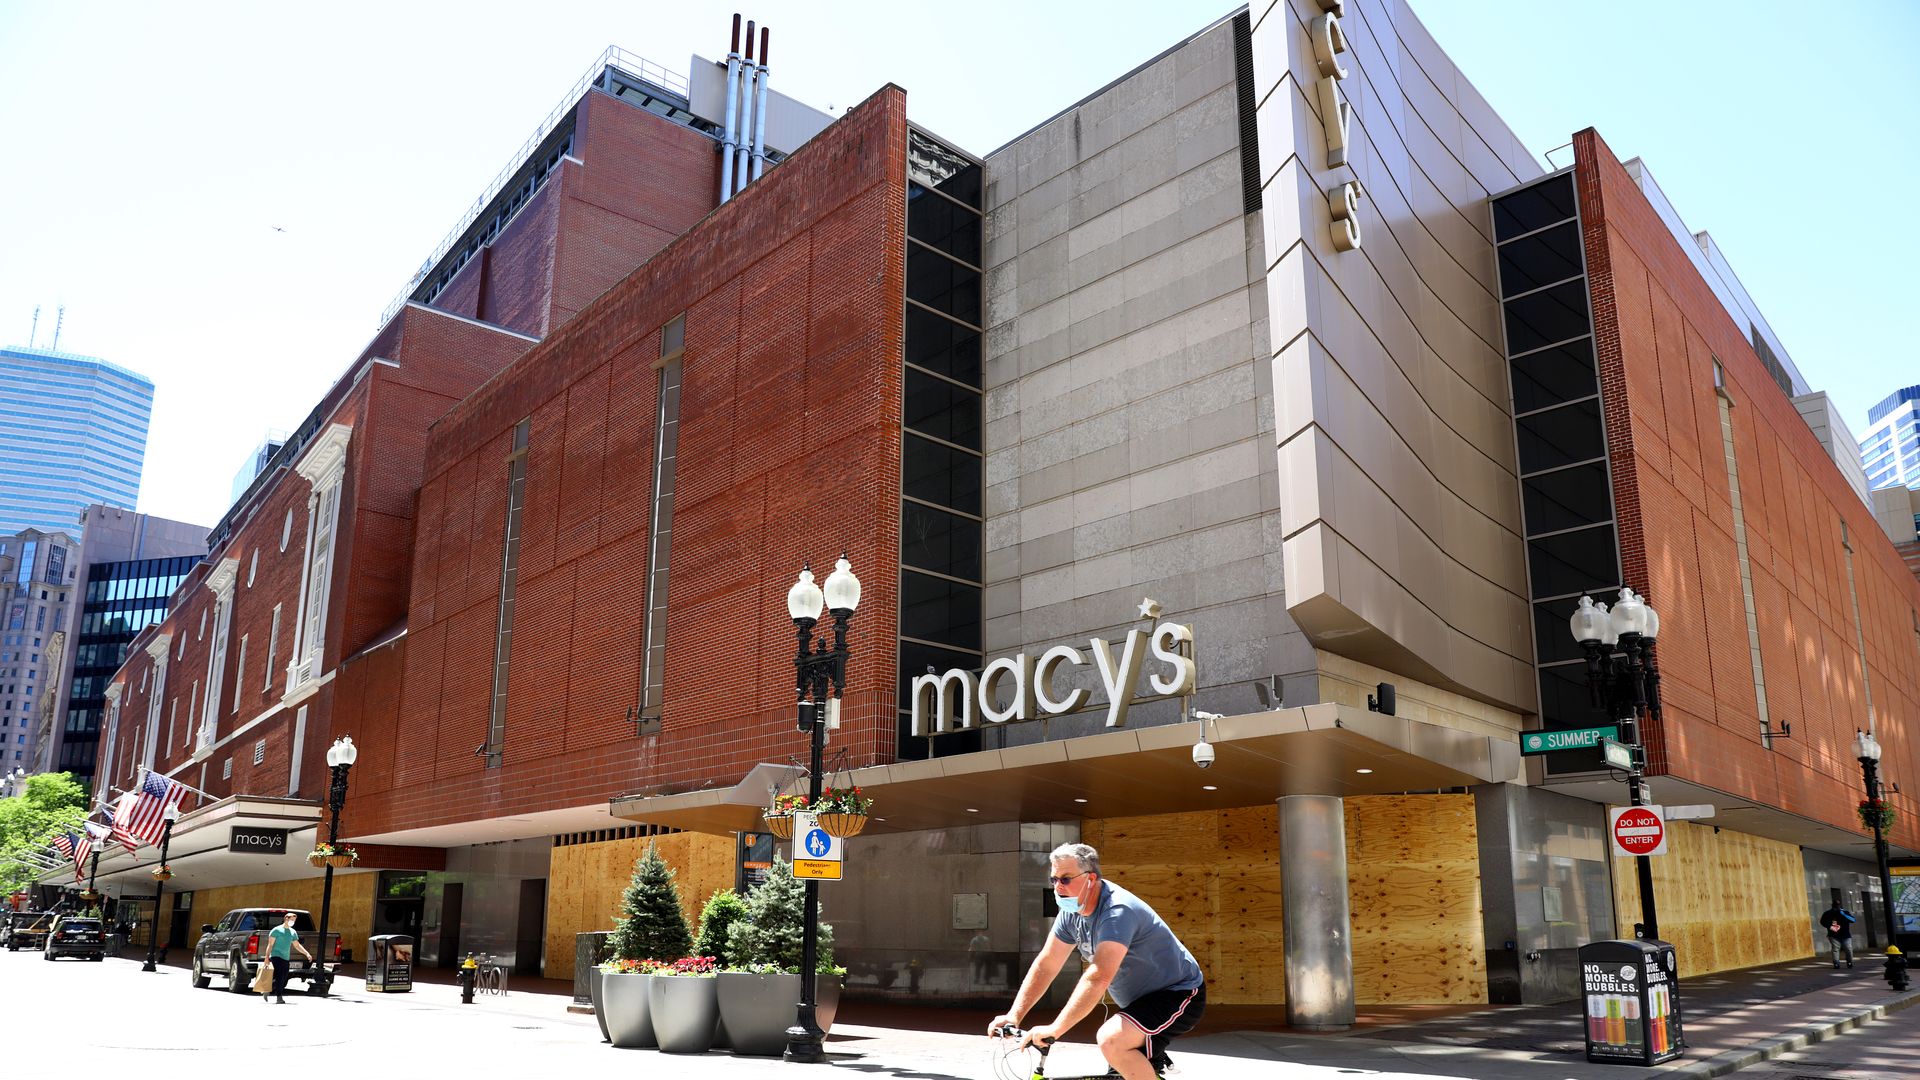 A Macy's in Boston on May 31.